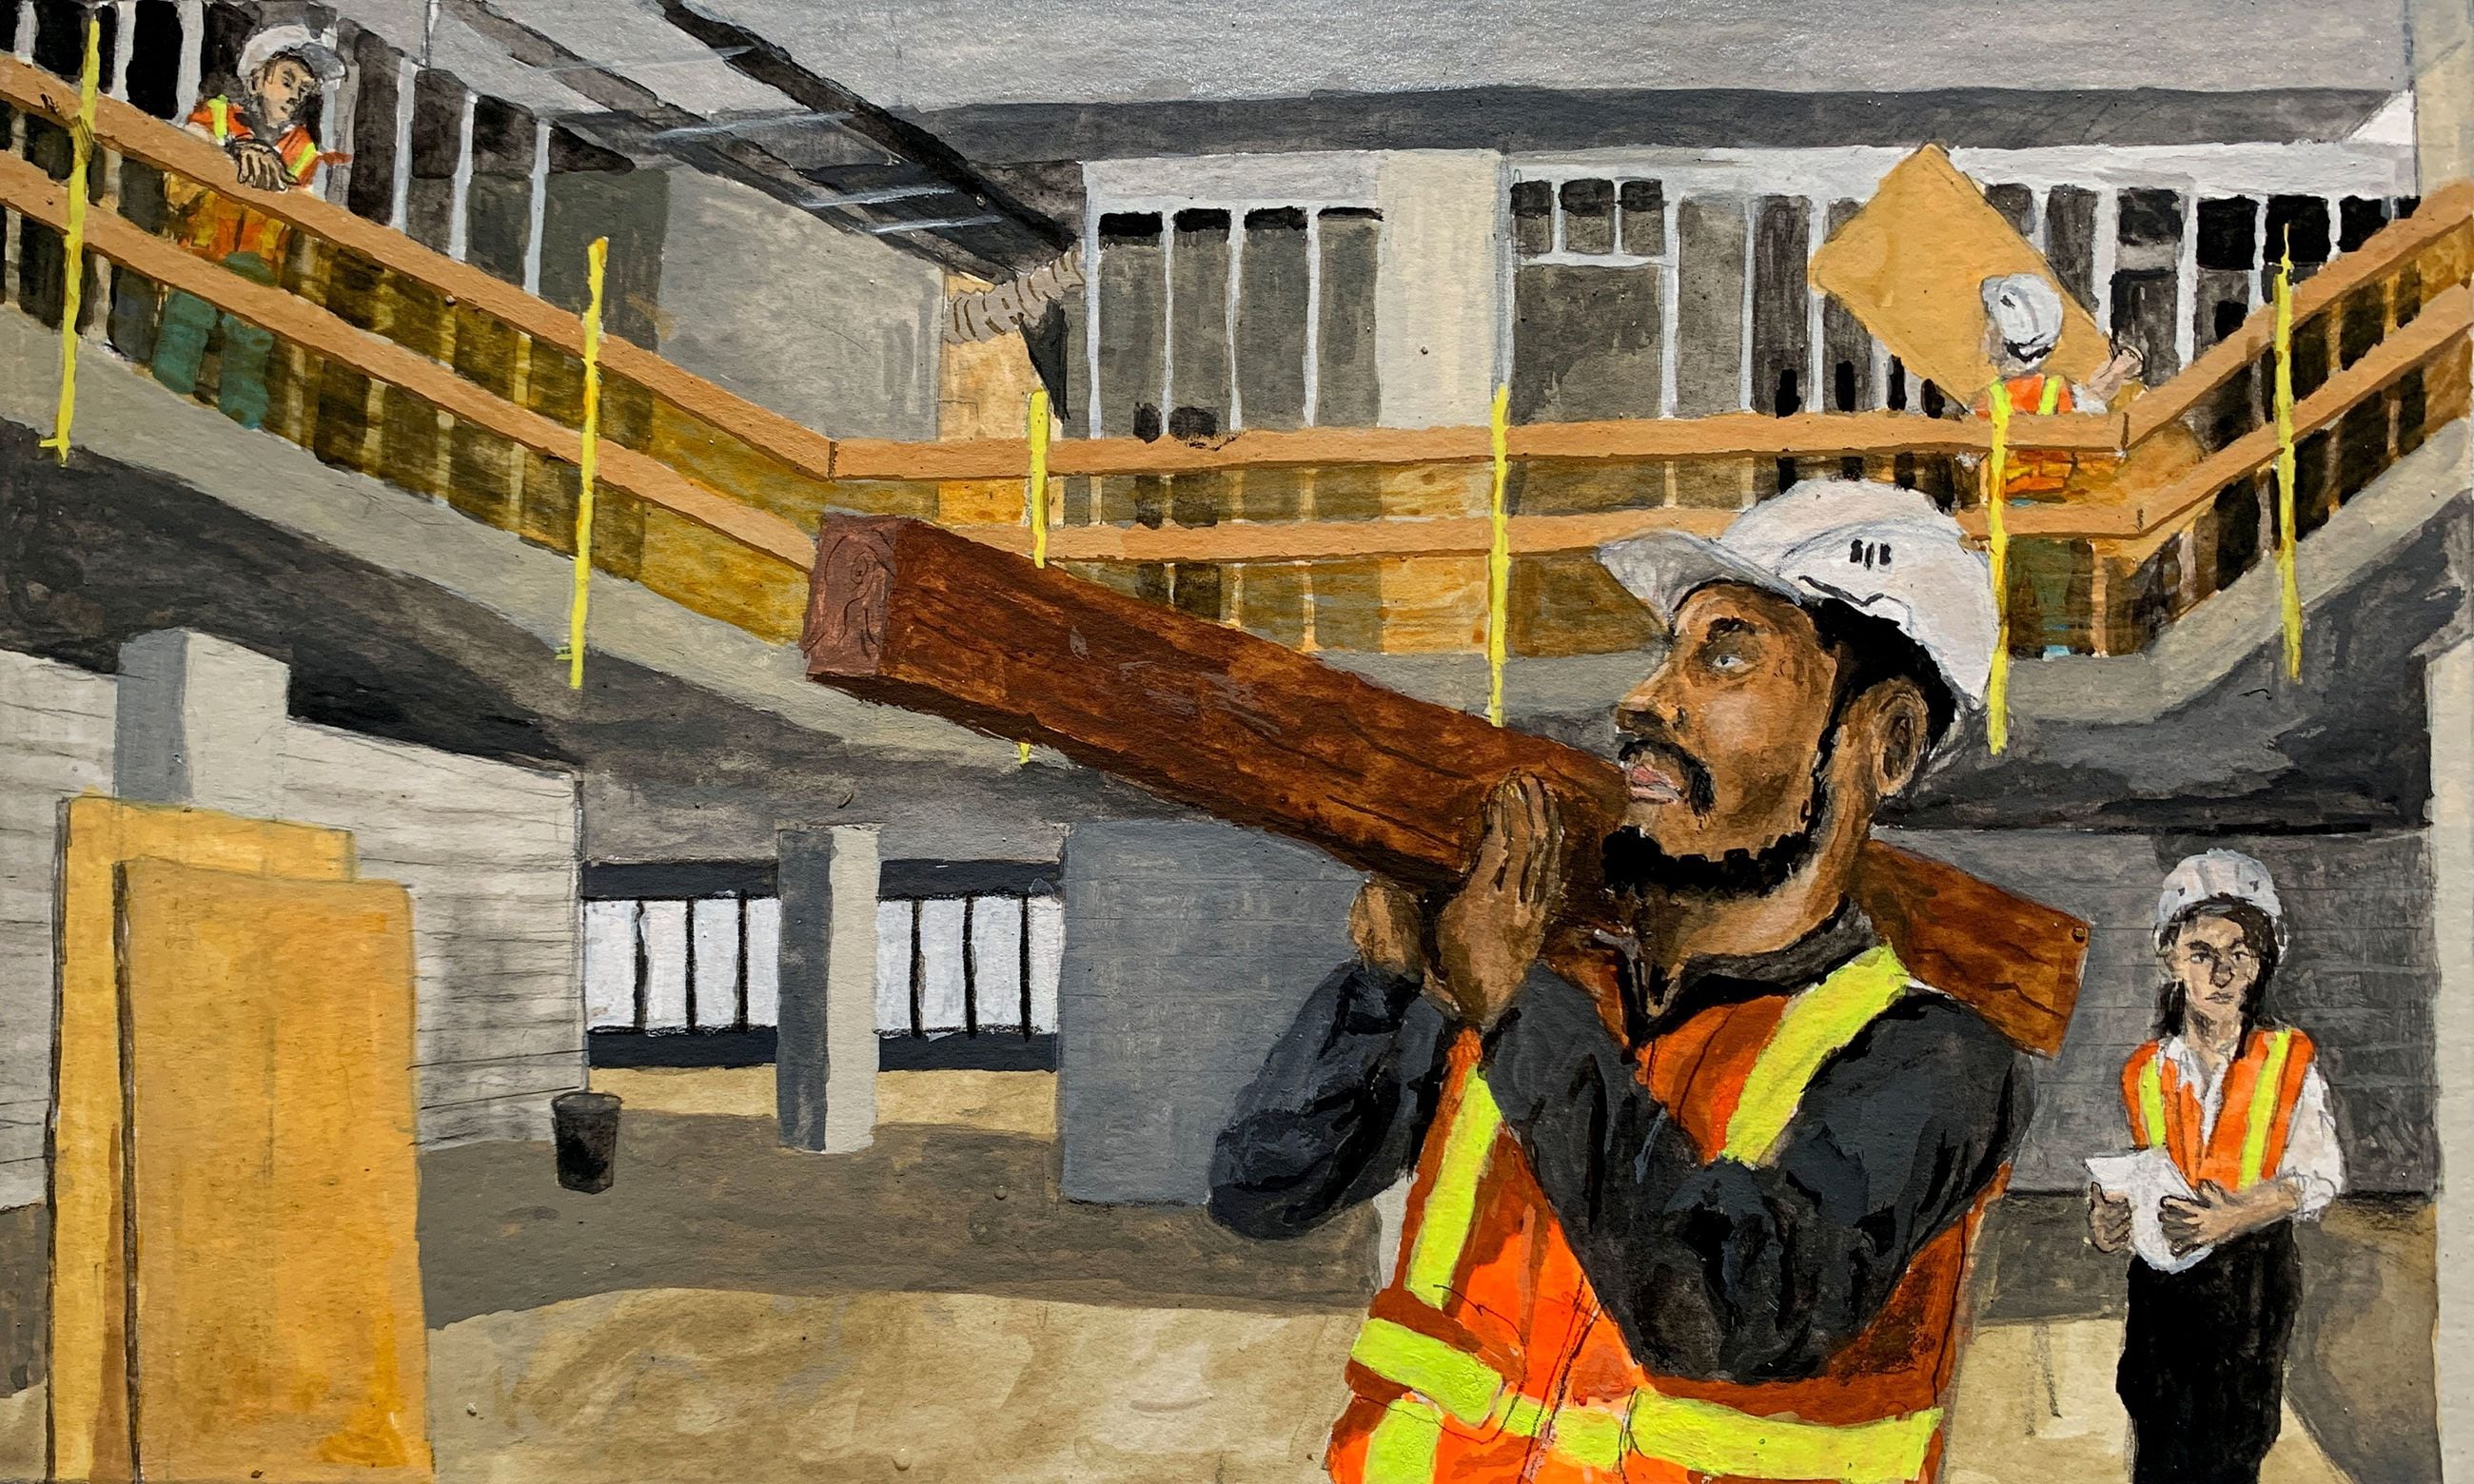 Construction workers don't argue about their tools. Neither should